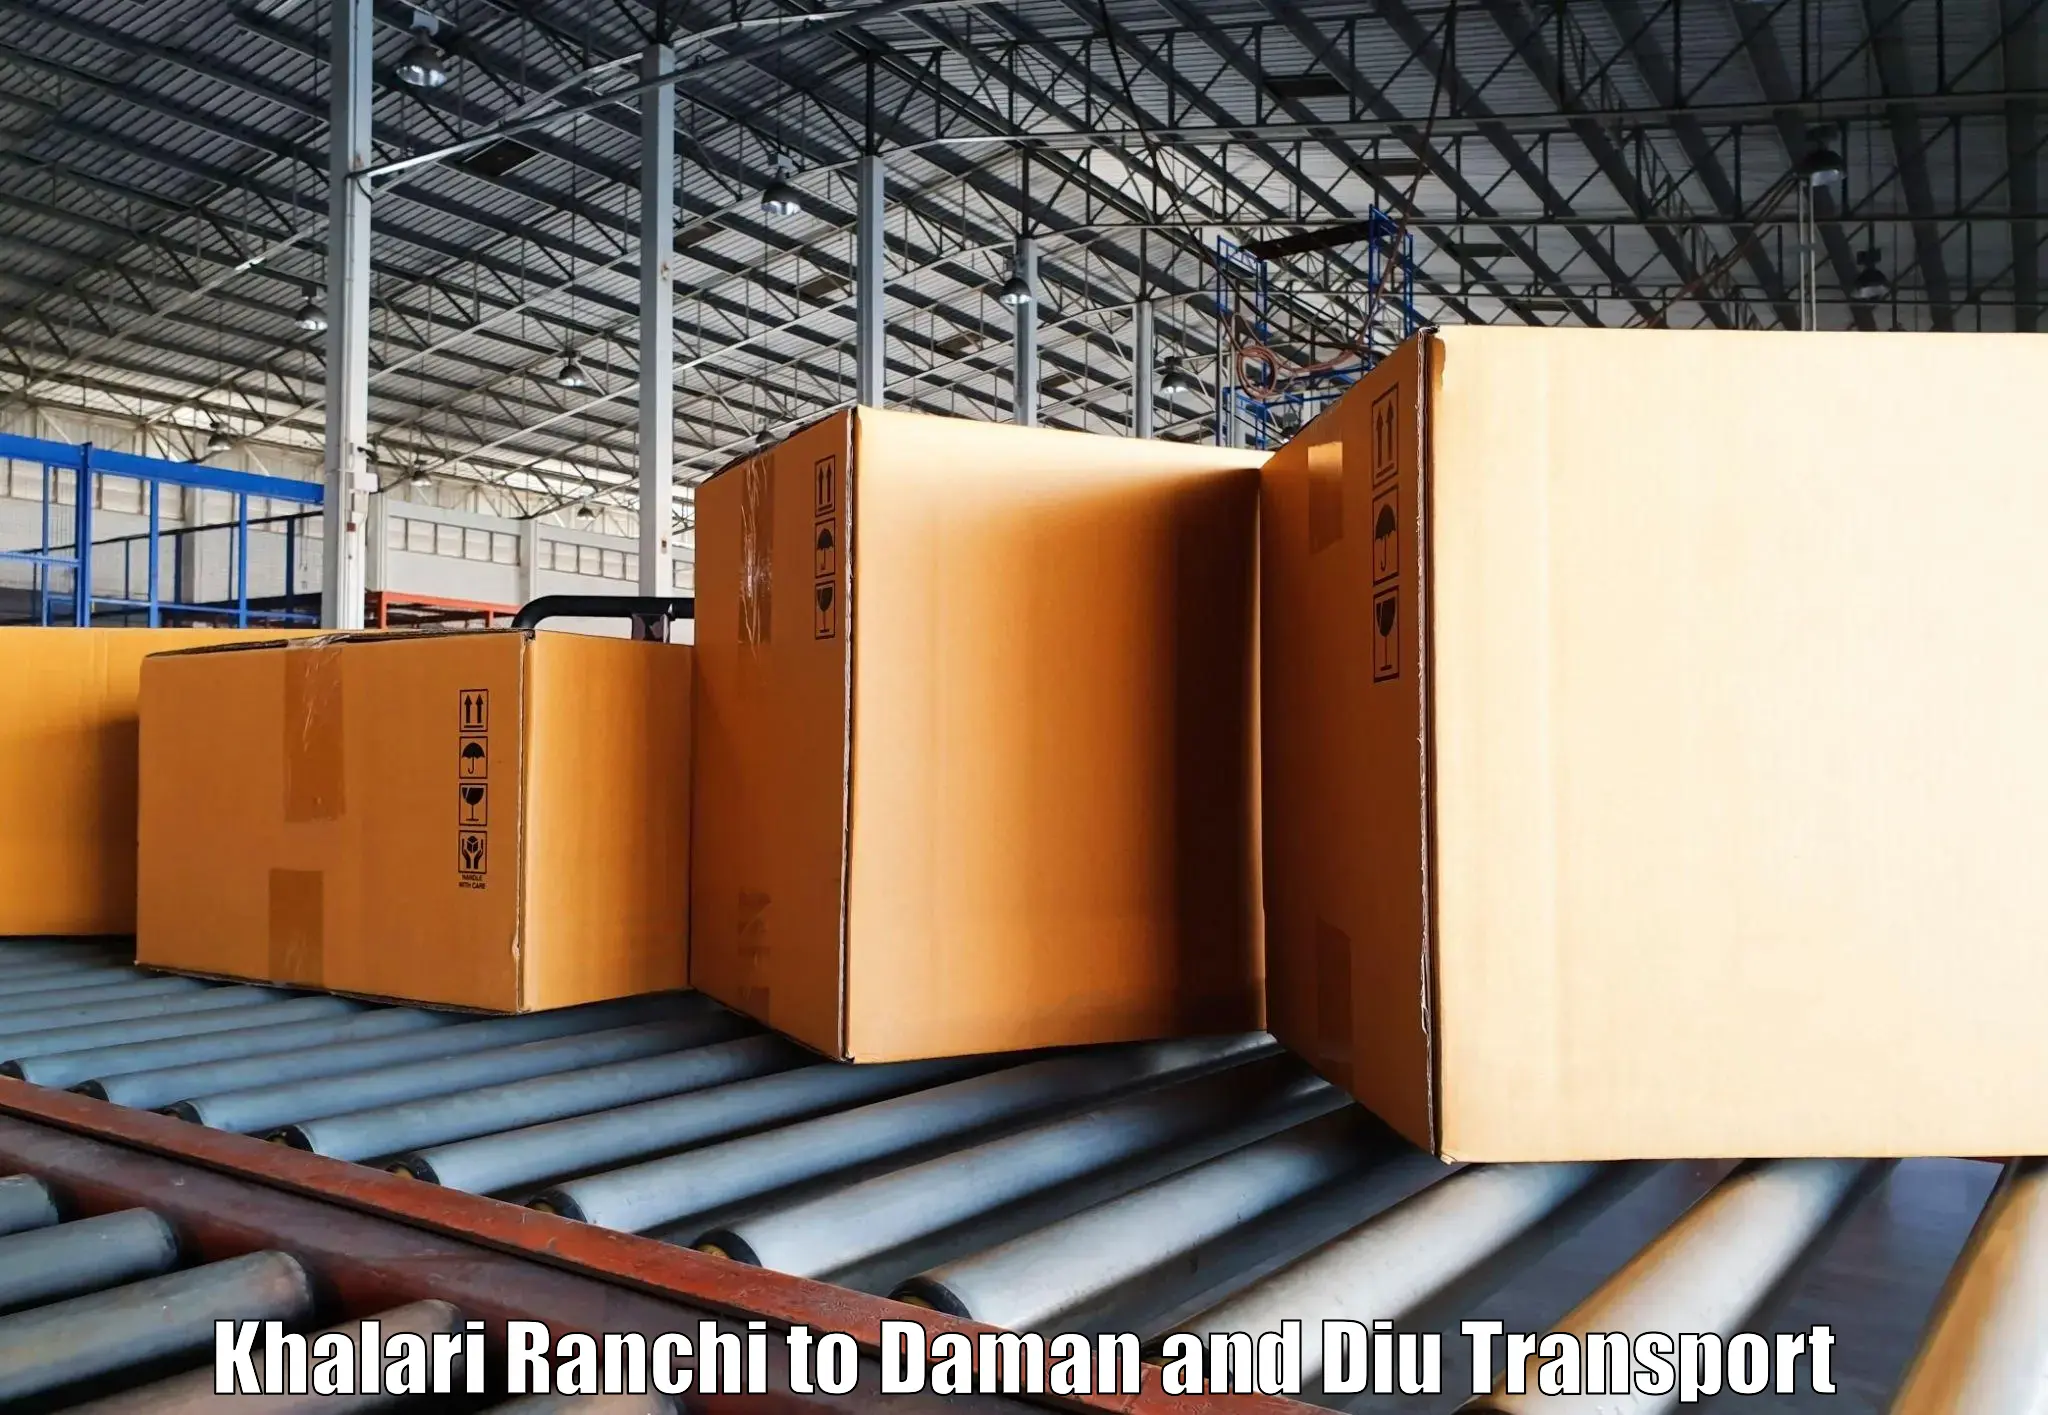 Transport bike from one state to another Khalari Ranchi to Diu